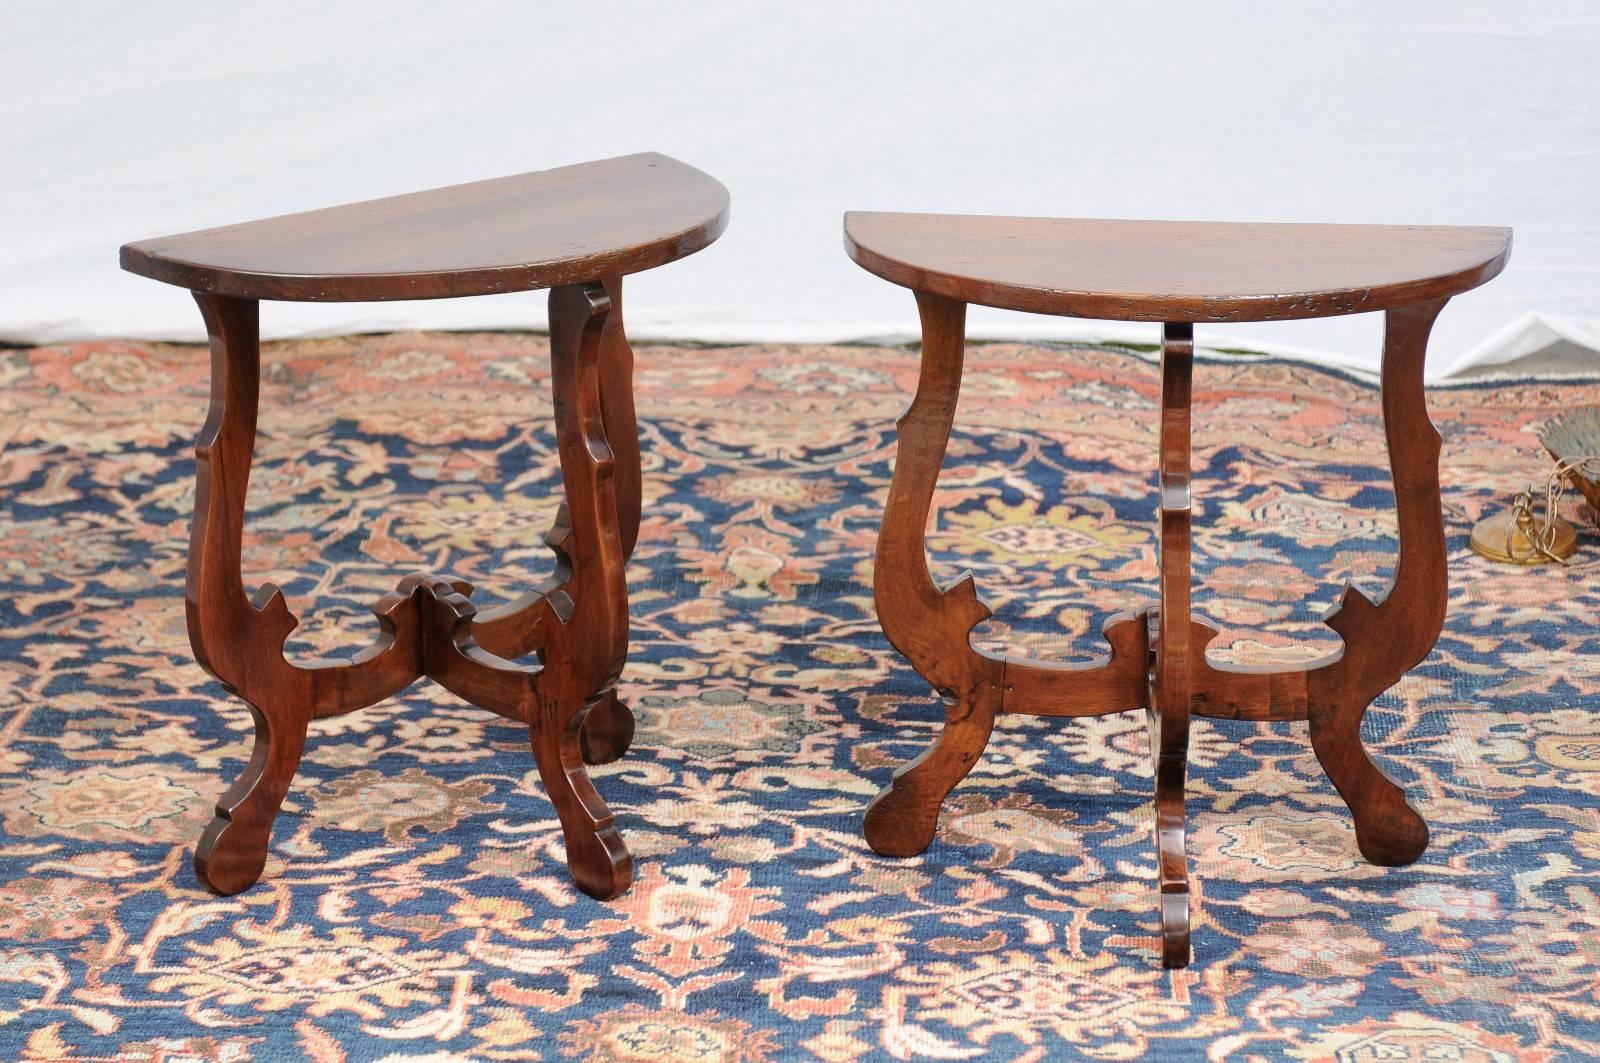 This pair of petite Italian Baroque style walnut demilune tables features typical half-moon shaped tops over three dimensional lyre-shaped legs. Each table is made of three carved wooden legs supporting the top, allowing the tables to stand on their